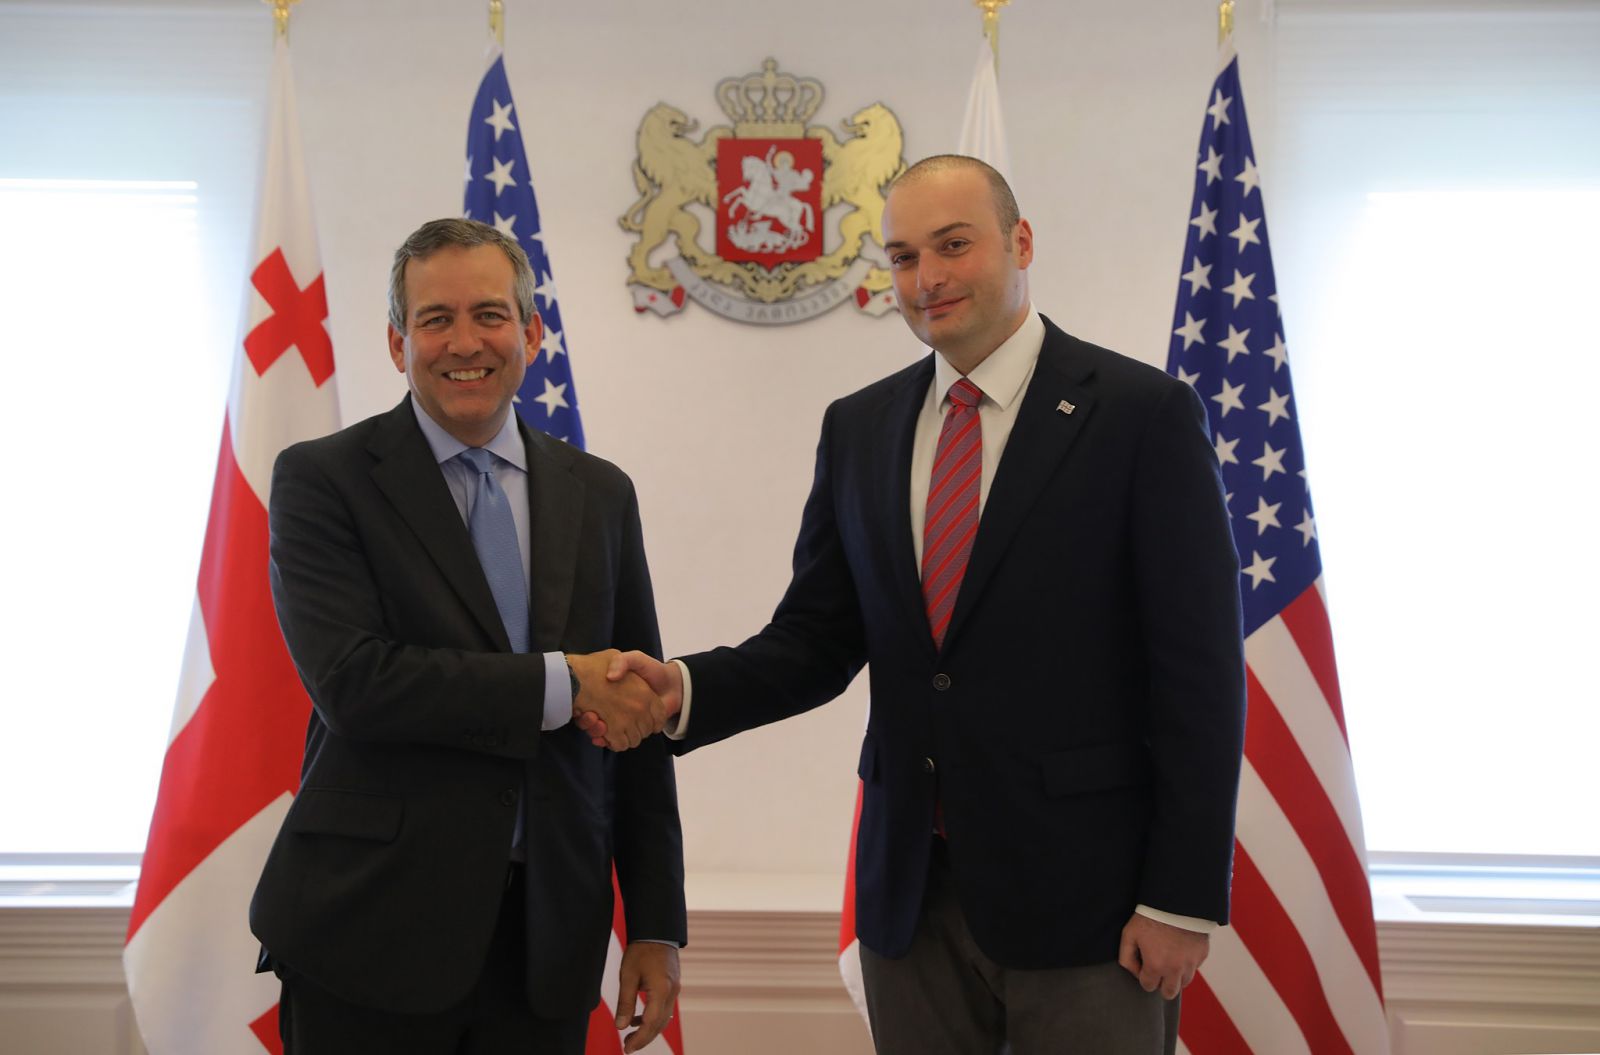 Photo of OPIC Executive Vice President David Bohigian shaking hands with Georgian Prime Minister Mamuka Bakhtadze standing in front of USA and Georgian flags, OPIC, Overseas Private Investment Corporation, Republic of Georgia, David Bohigian, Mamuka Bakhtadze, investment, Caucasus, Anakali, Poti, infrastructure, development finance, investing overseas